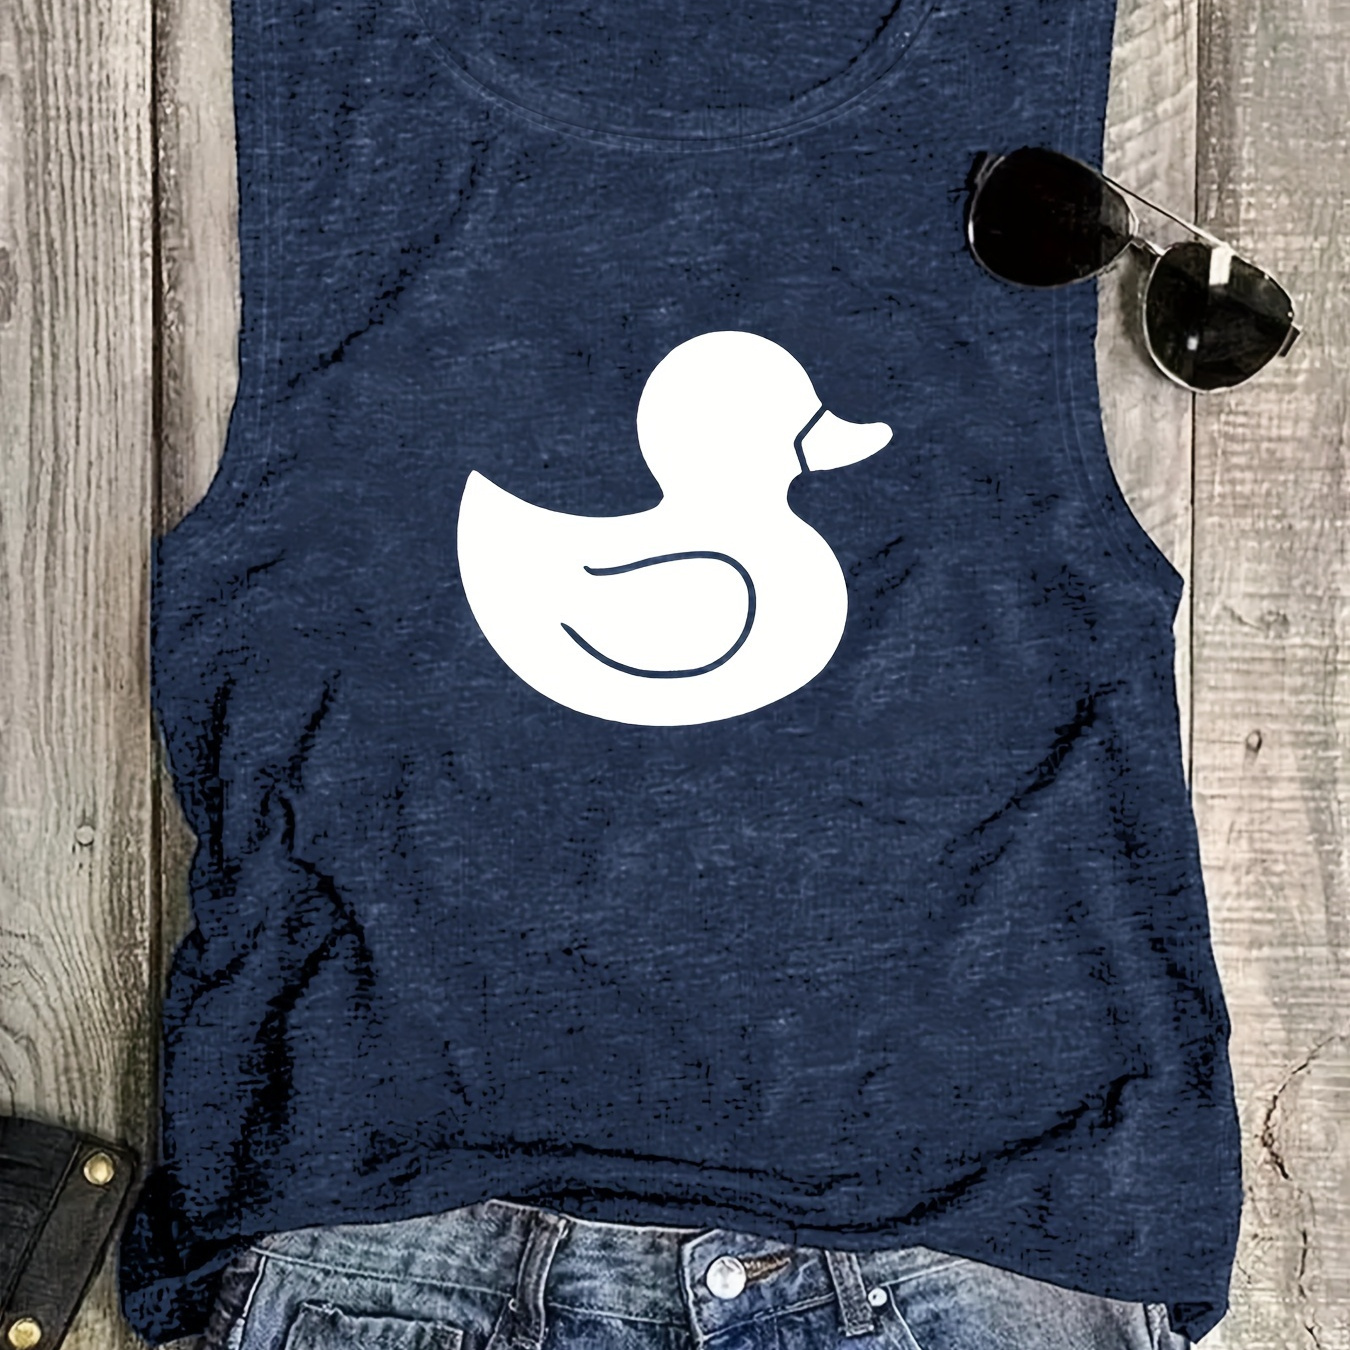 

Duck Print Crew Neck Tank Top, Casual Sleeveless Tank Top For Summer, Women's Clothing